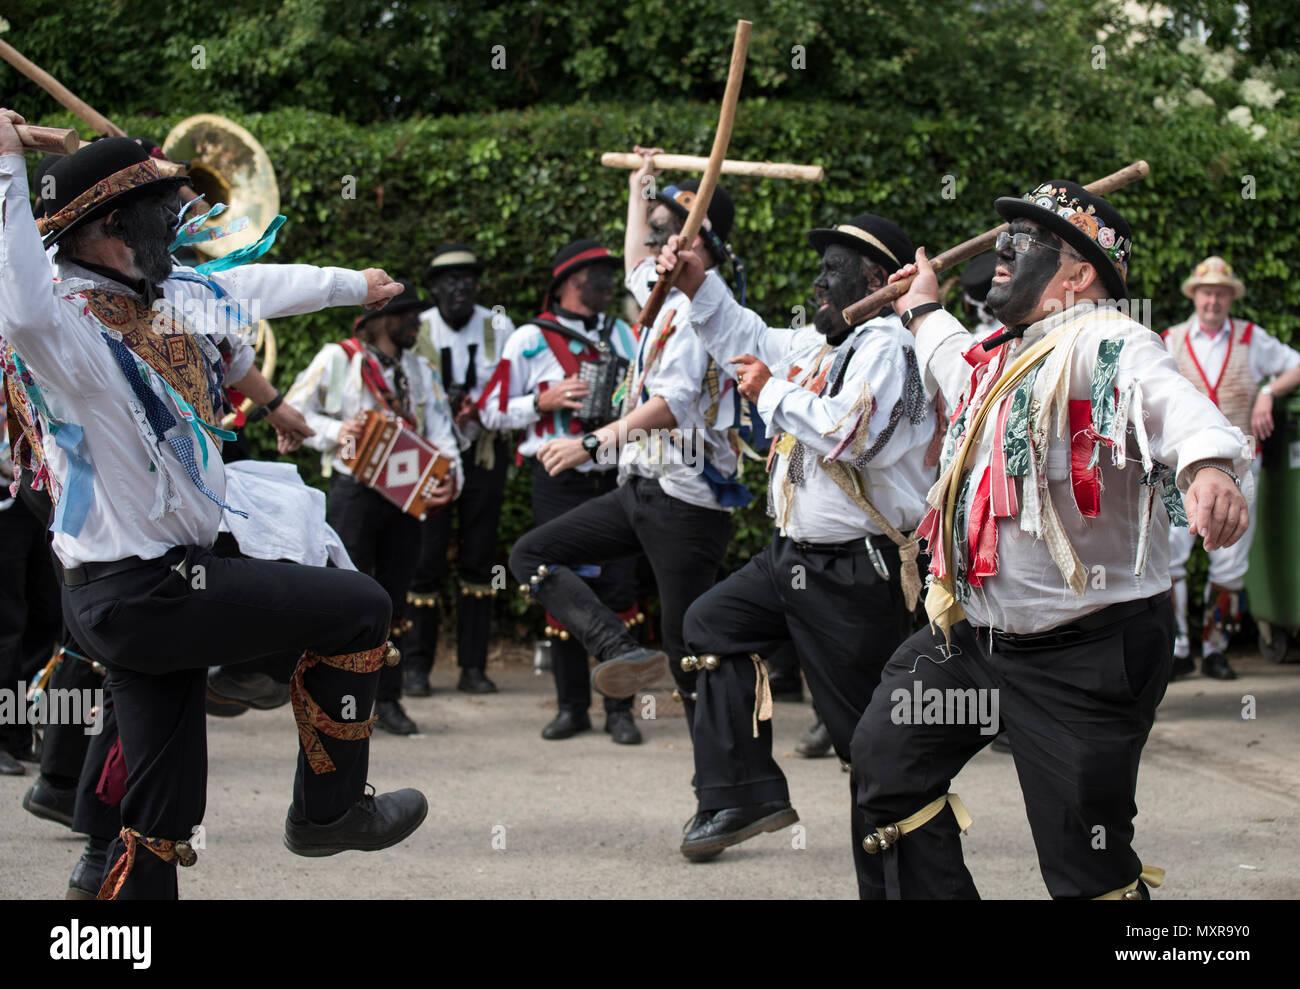 Thaxted Morris Weekend 2-3 June 2018 The Silurian Morris dancing side from Herefordshire dancing in the villages around Thaxted. Stock Photo